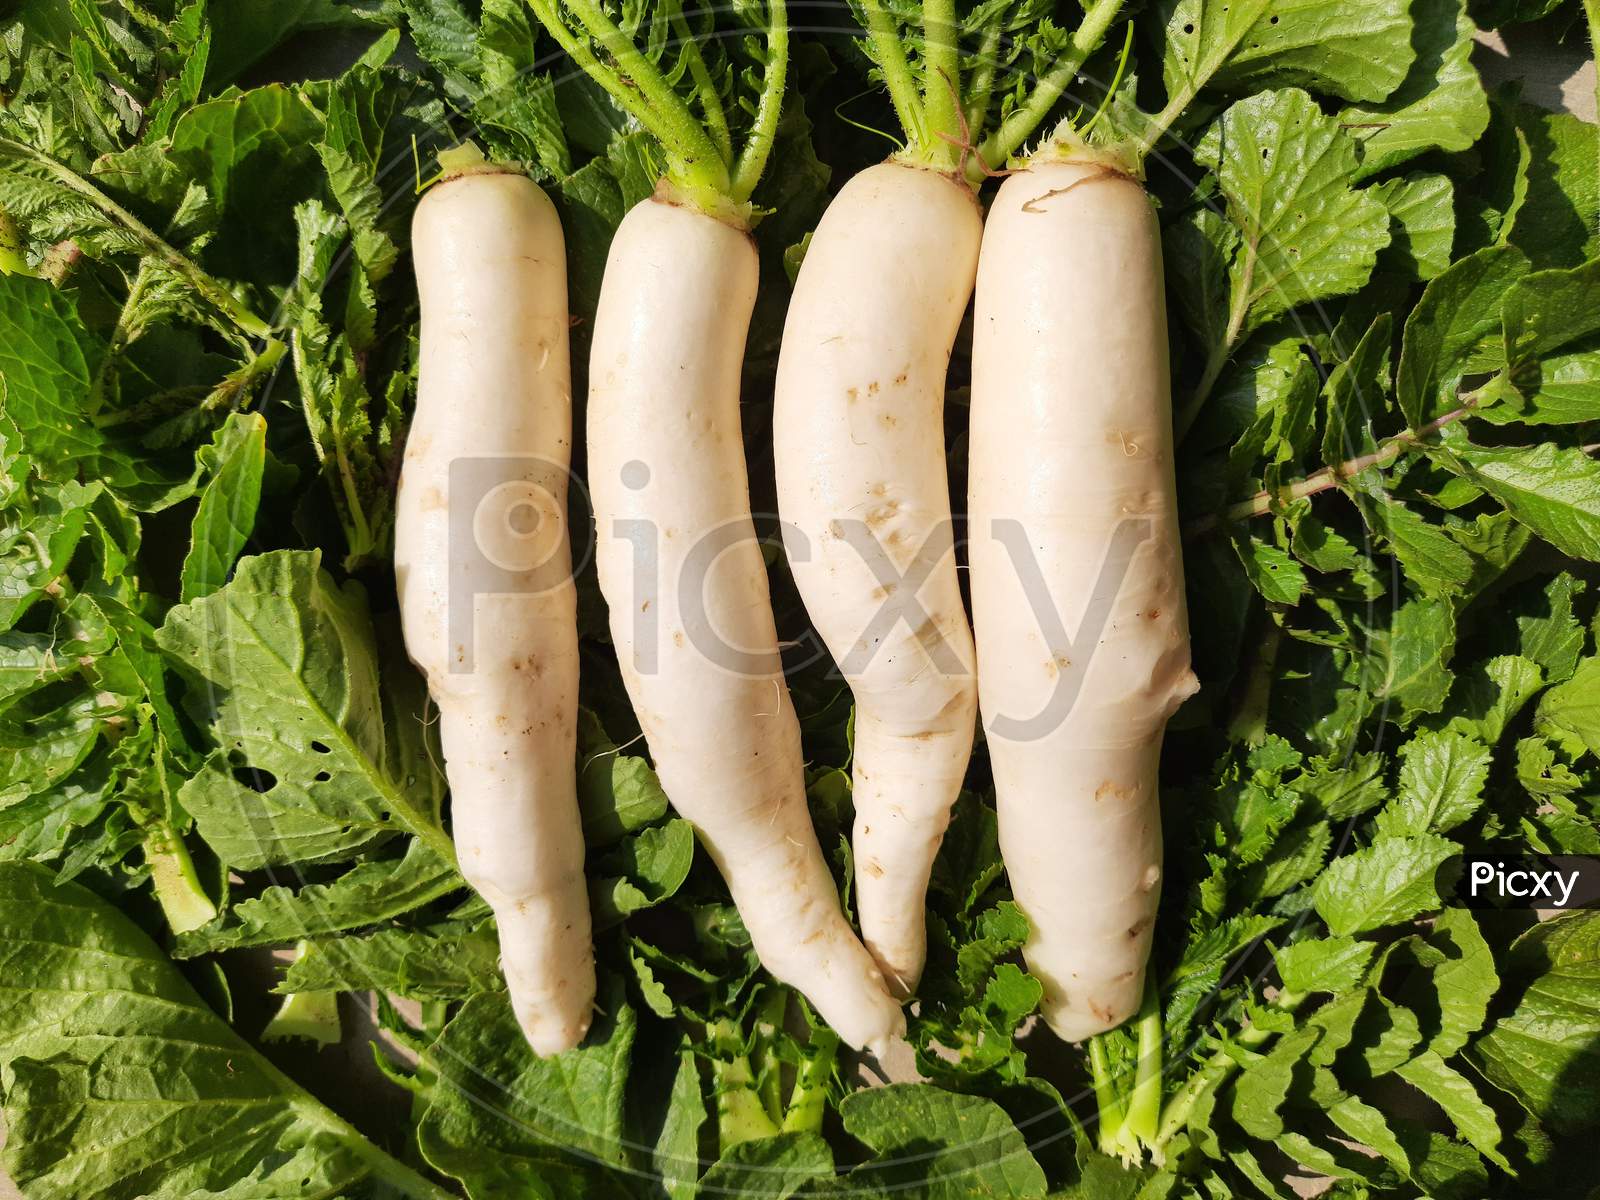 Radish is an edible root vegetable of the family Brassicaceae.